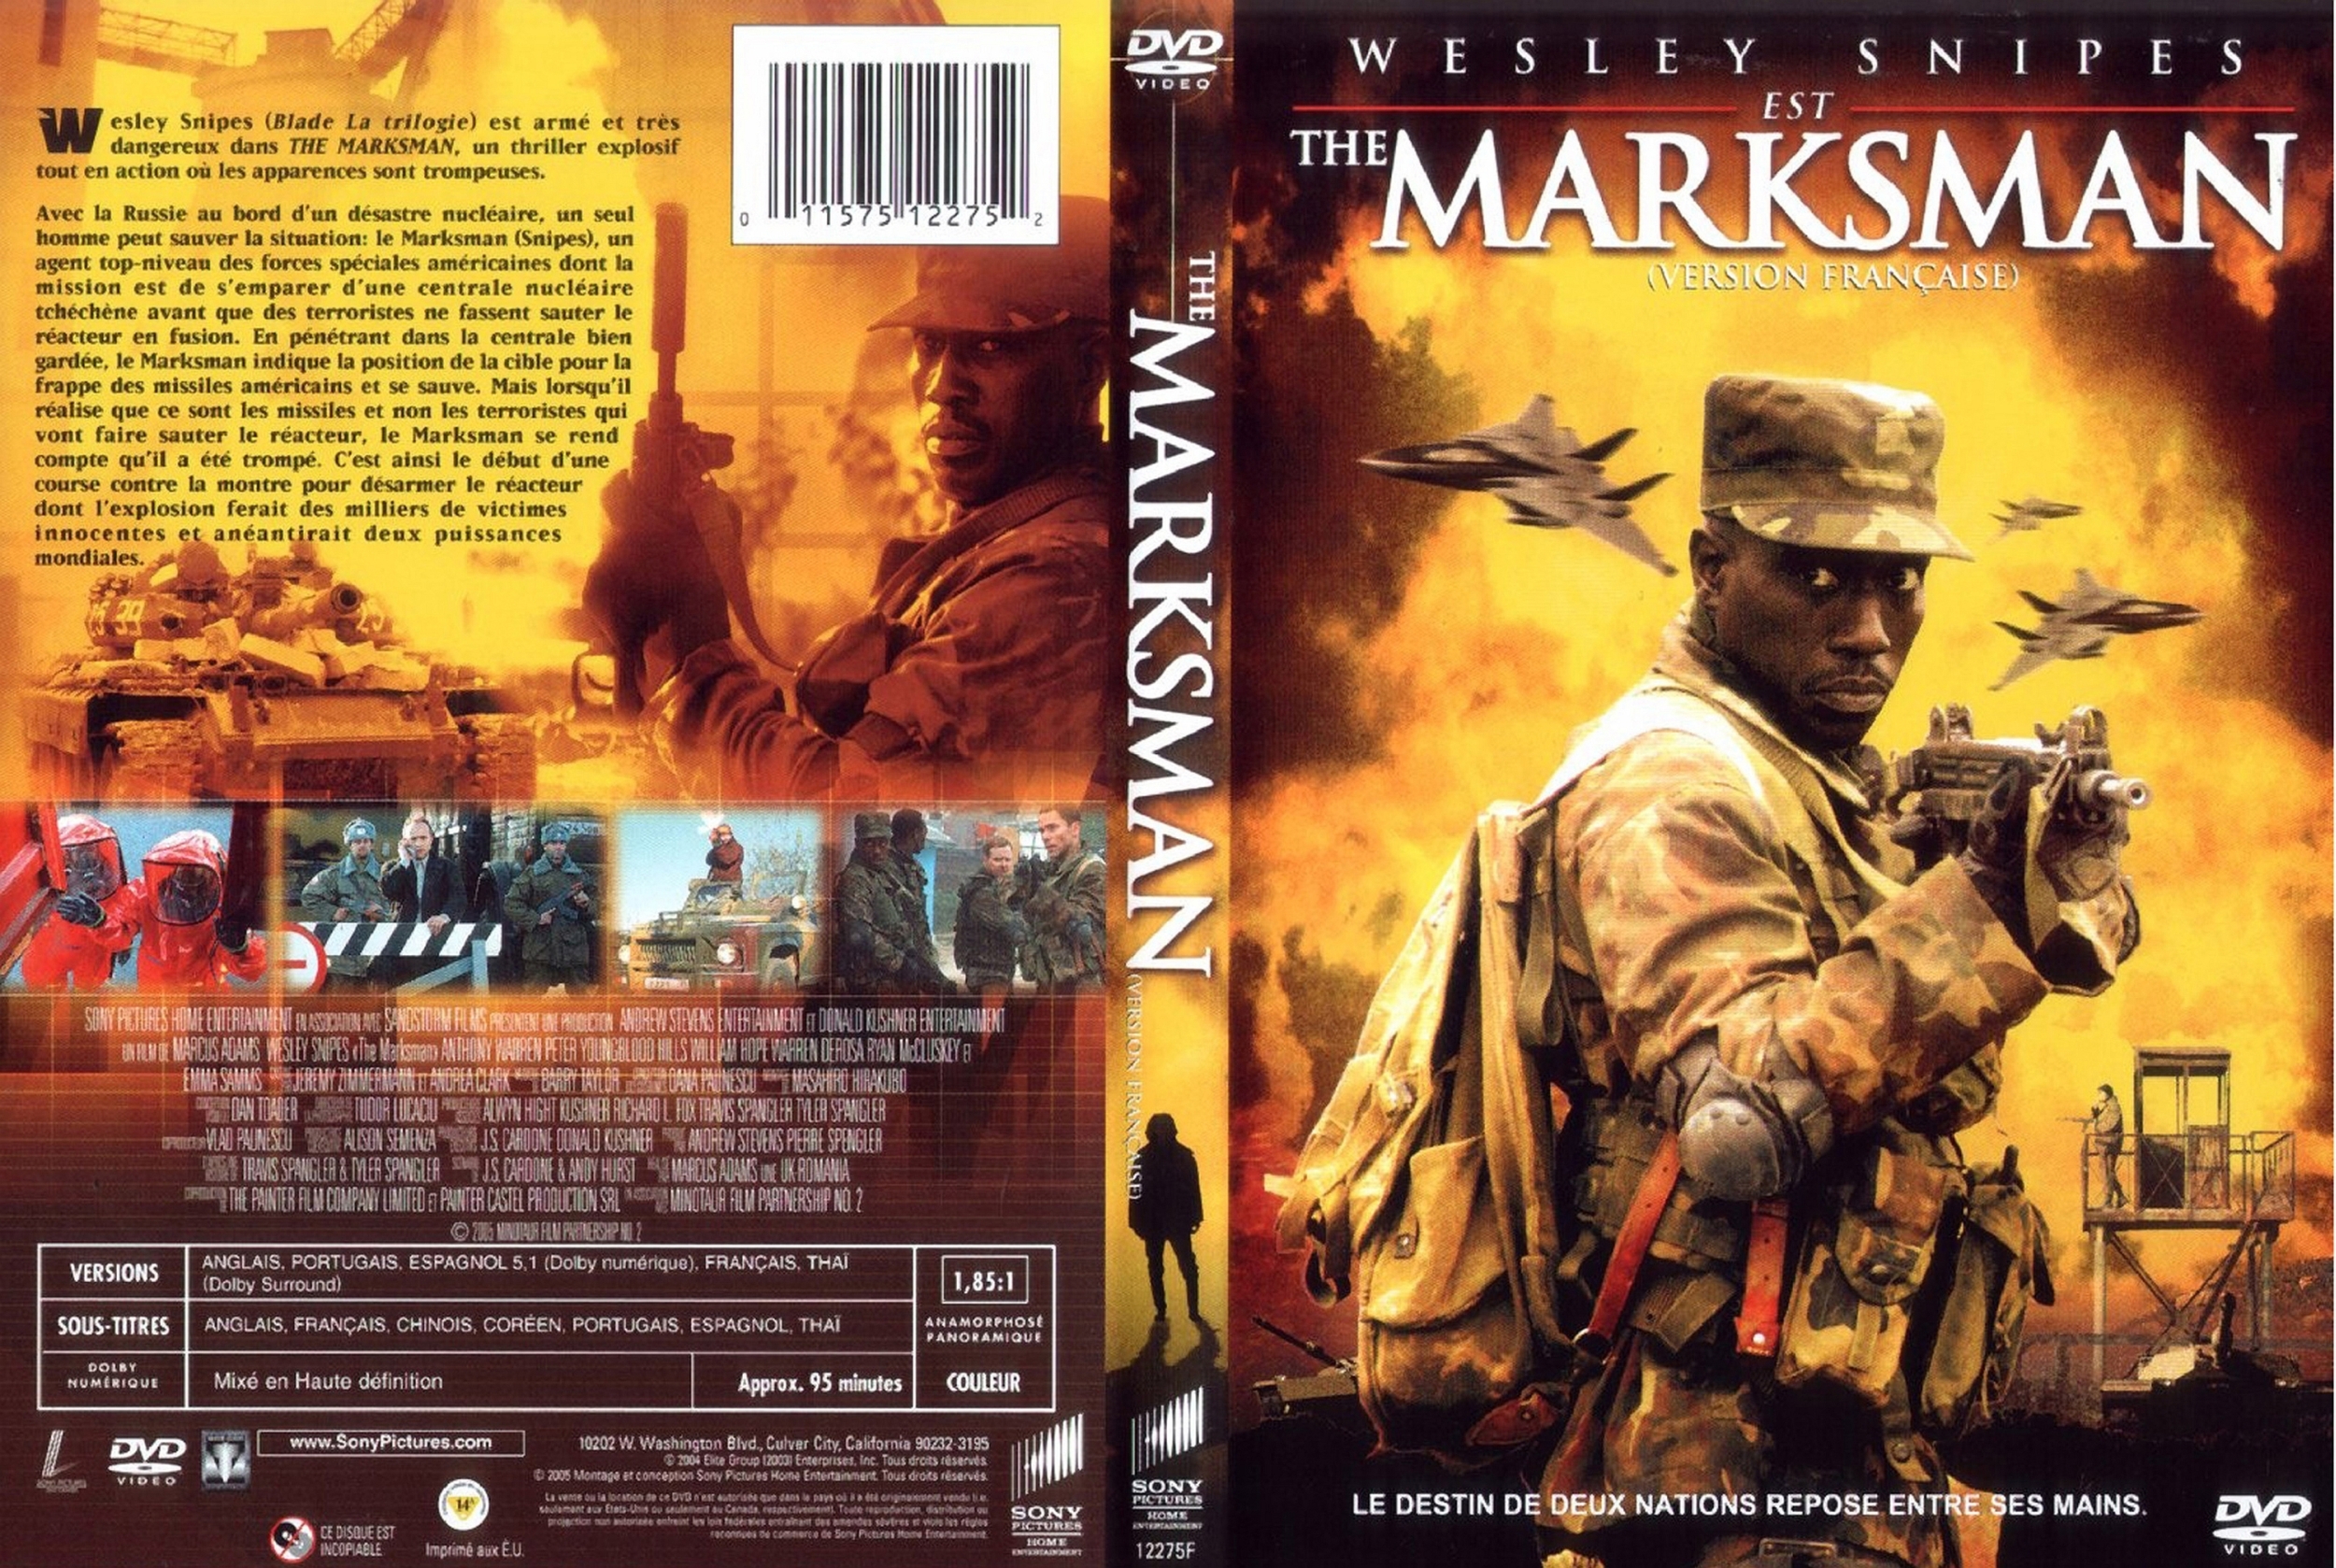 Jaquette DVD The marksman